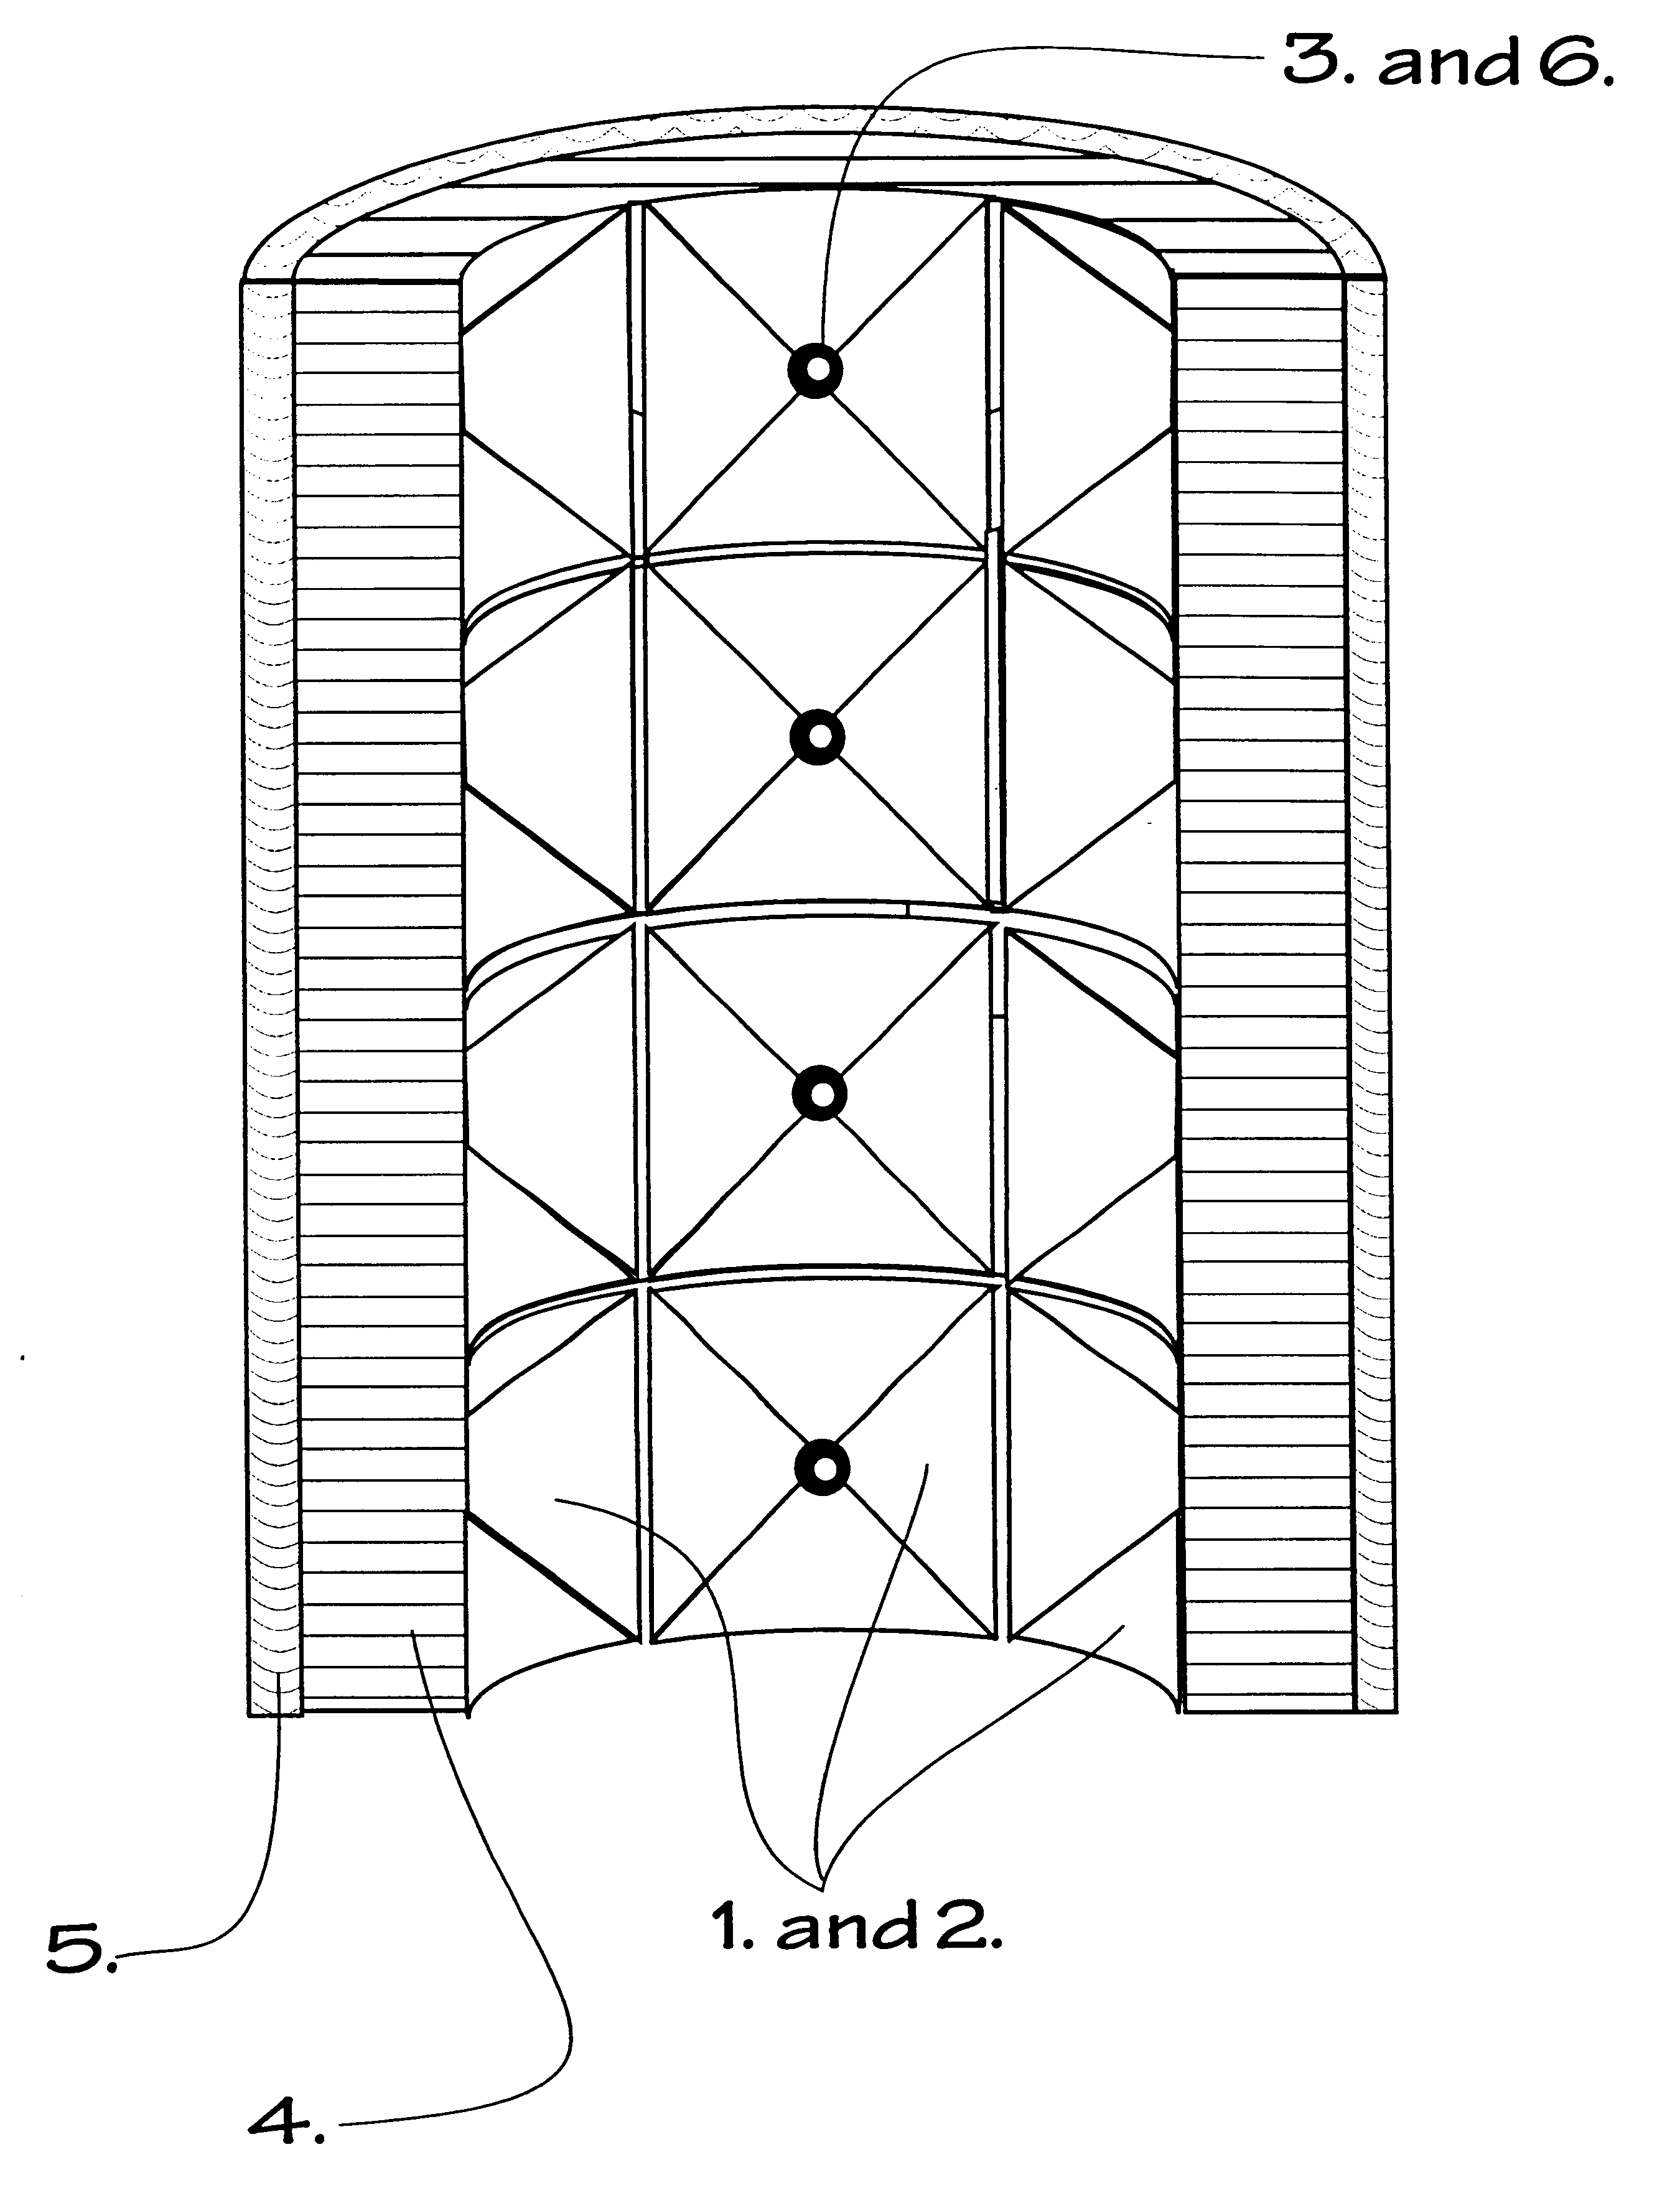 Method of construction for density screening outer transport walls